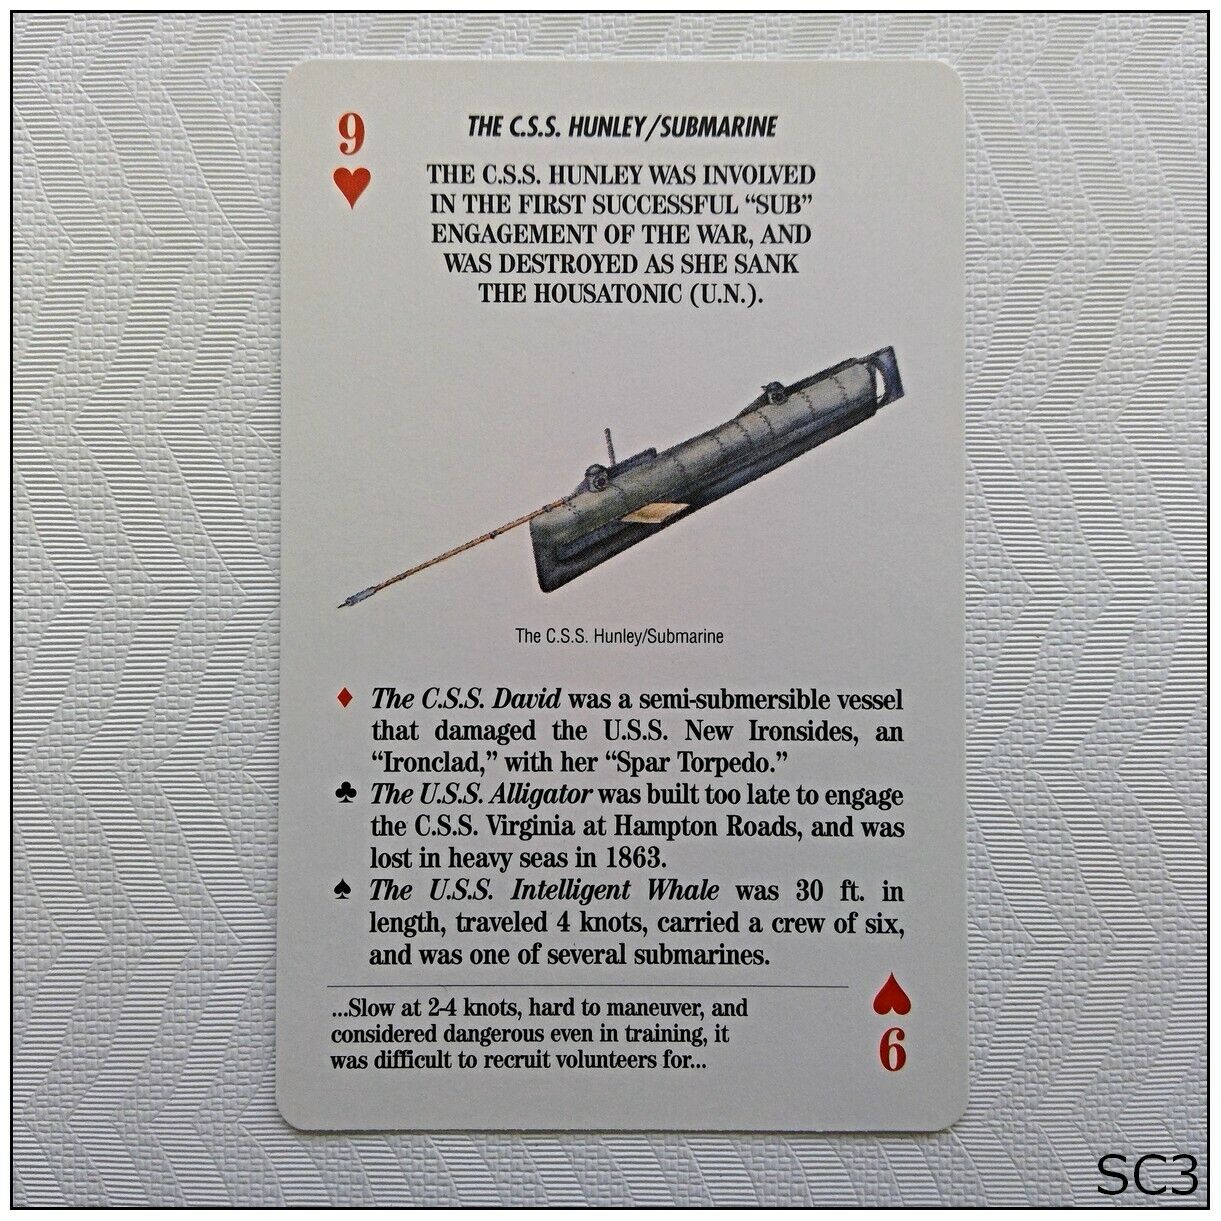 Arms and Armaments Civil War C.S.S. Hunley Submarine Playing Card (SC3)